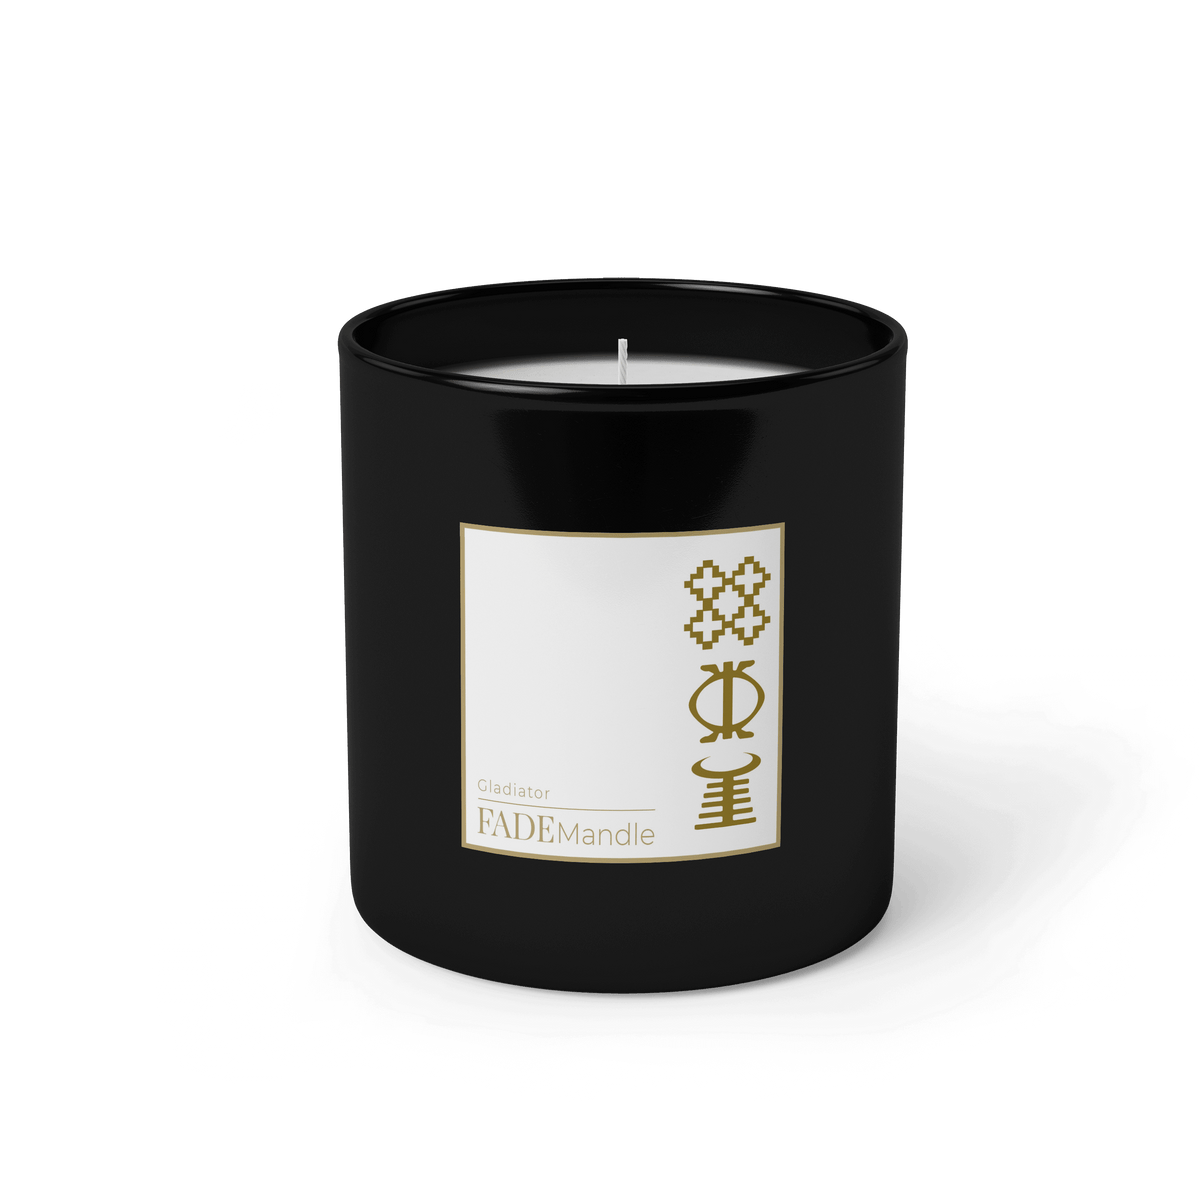 Men's Candle in Black Glass